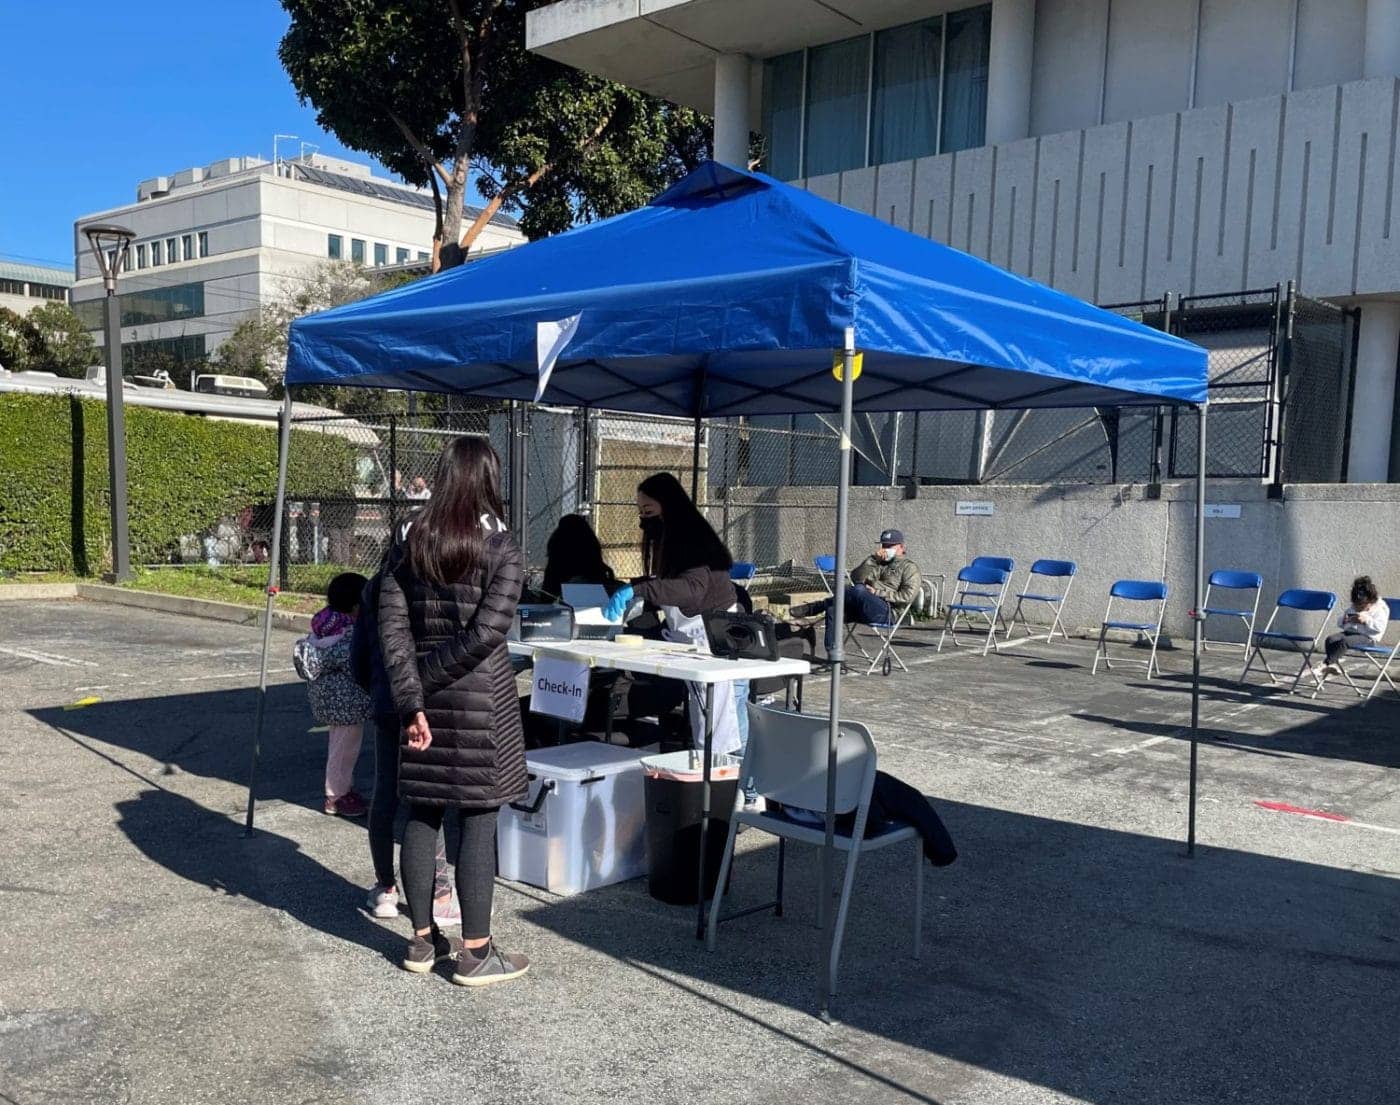 SFUSD-family-receiving-free-COVID-19-rapid-antigen-tests-at-SFUSD555-Franklin-Street-by-Daphne-Young-010922-1400x1105, SFUSD and teachers’ unions reach deal for COVID protocols, News & Views 